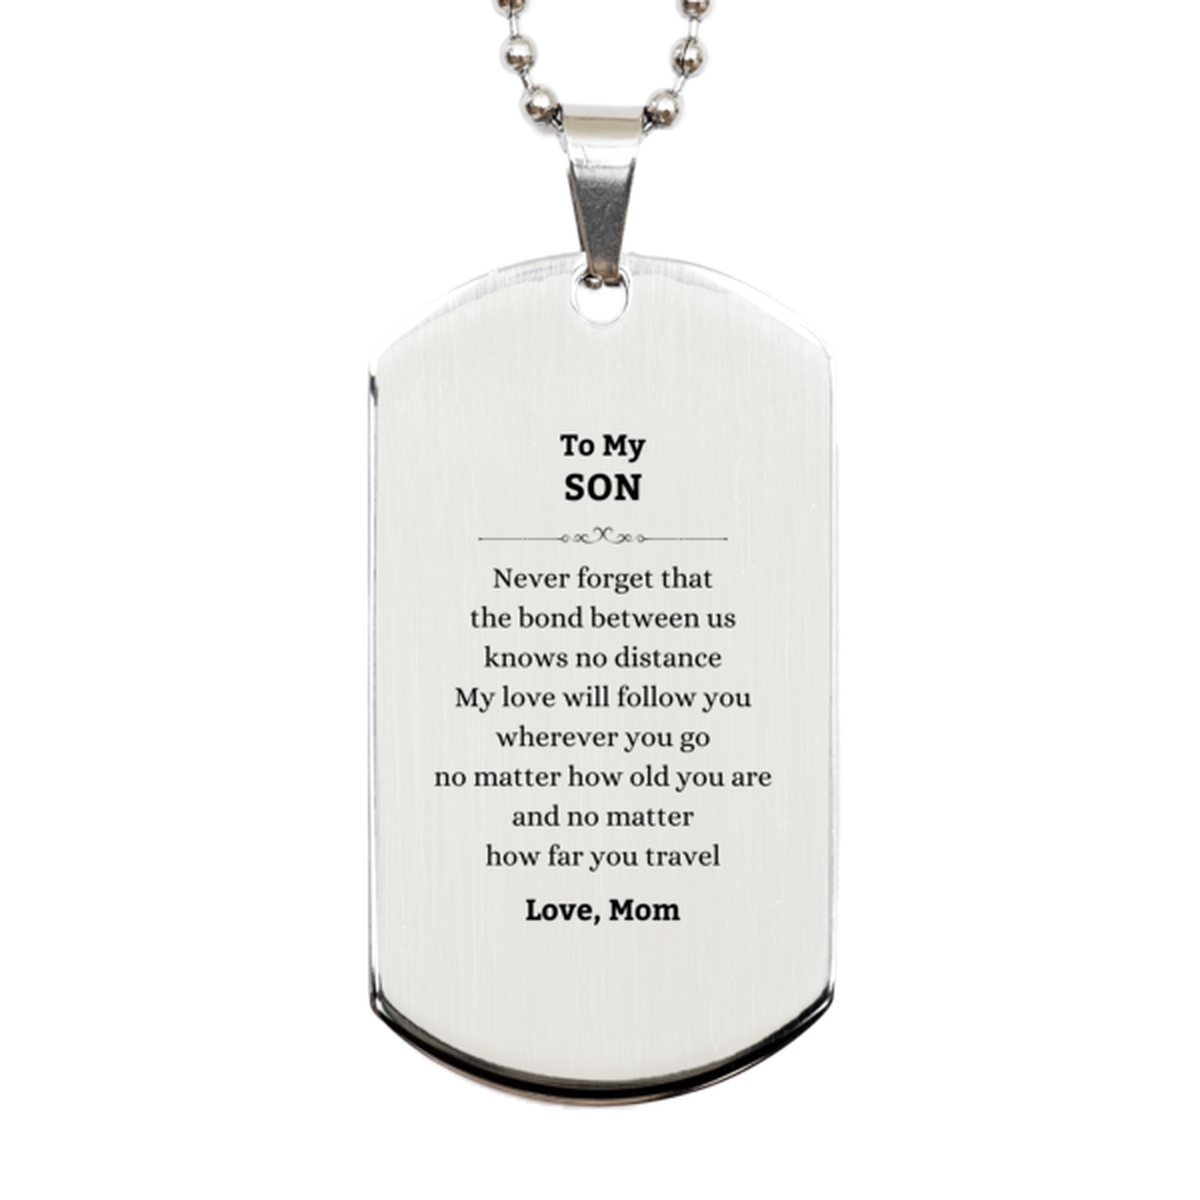 Son Birthday Gifts from Mom, Adjustable Silver Dog Tag for Son Christmas Graduation Unique Gifts Son Never forget that the bond between us knows no distance. Love, Mom